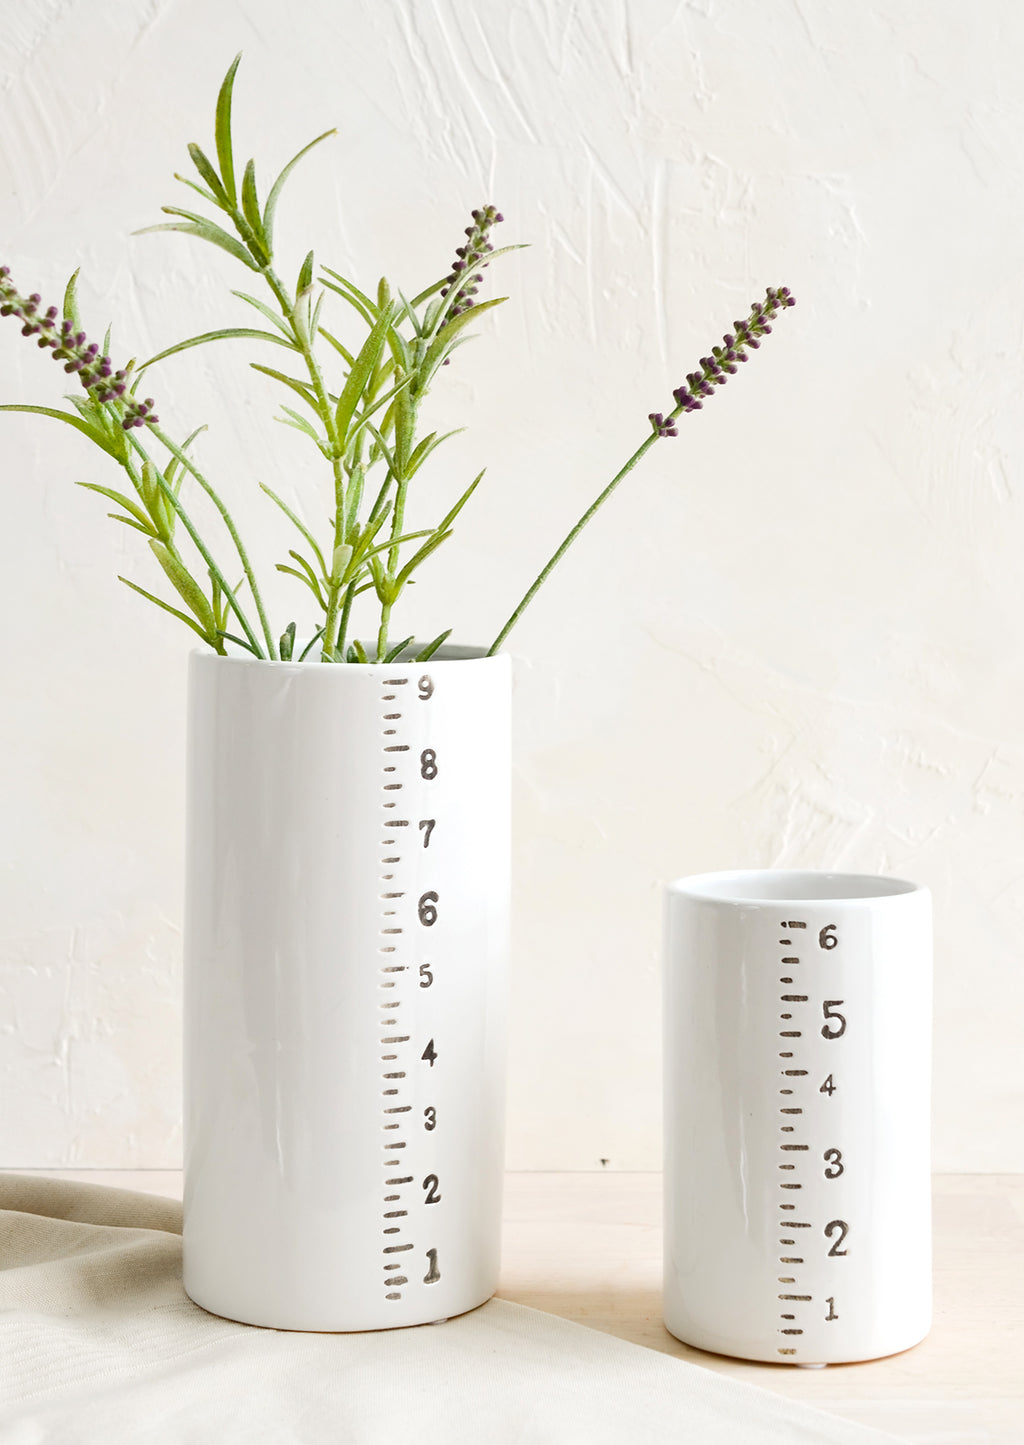 1: Short and tall ceramic vases with ruler detailing on side.